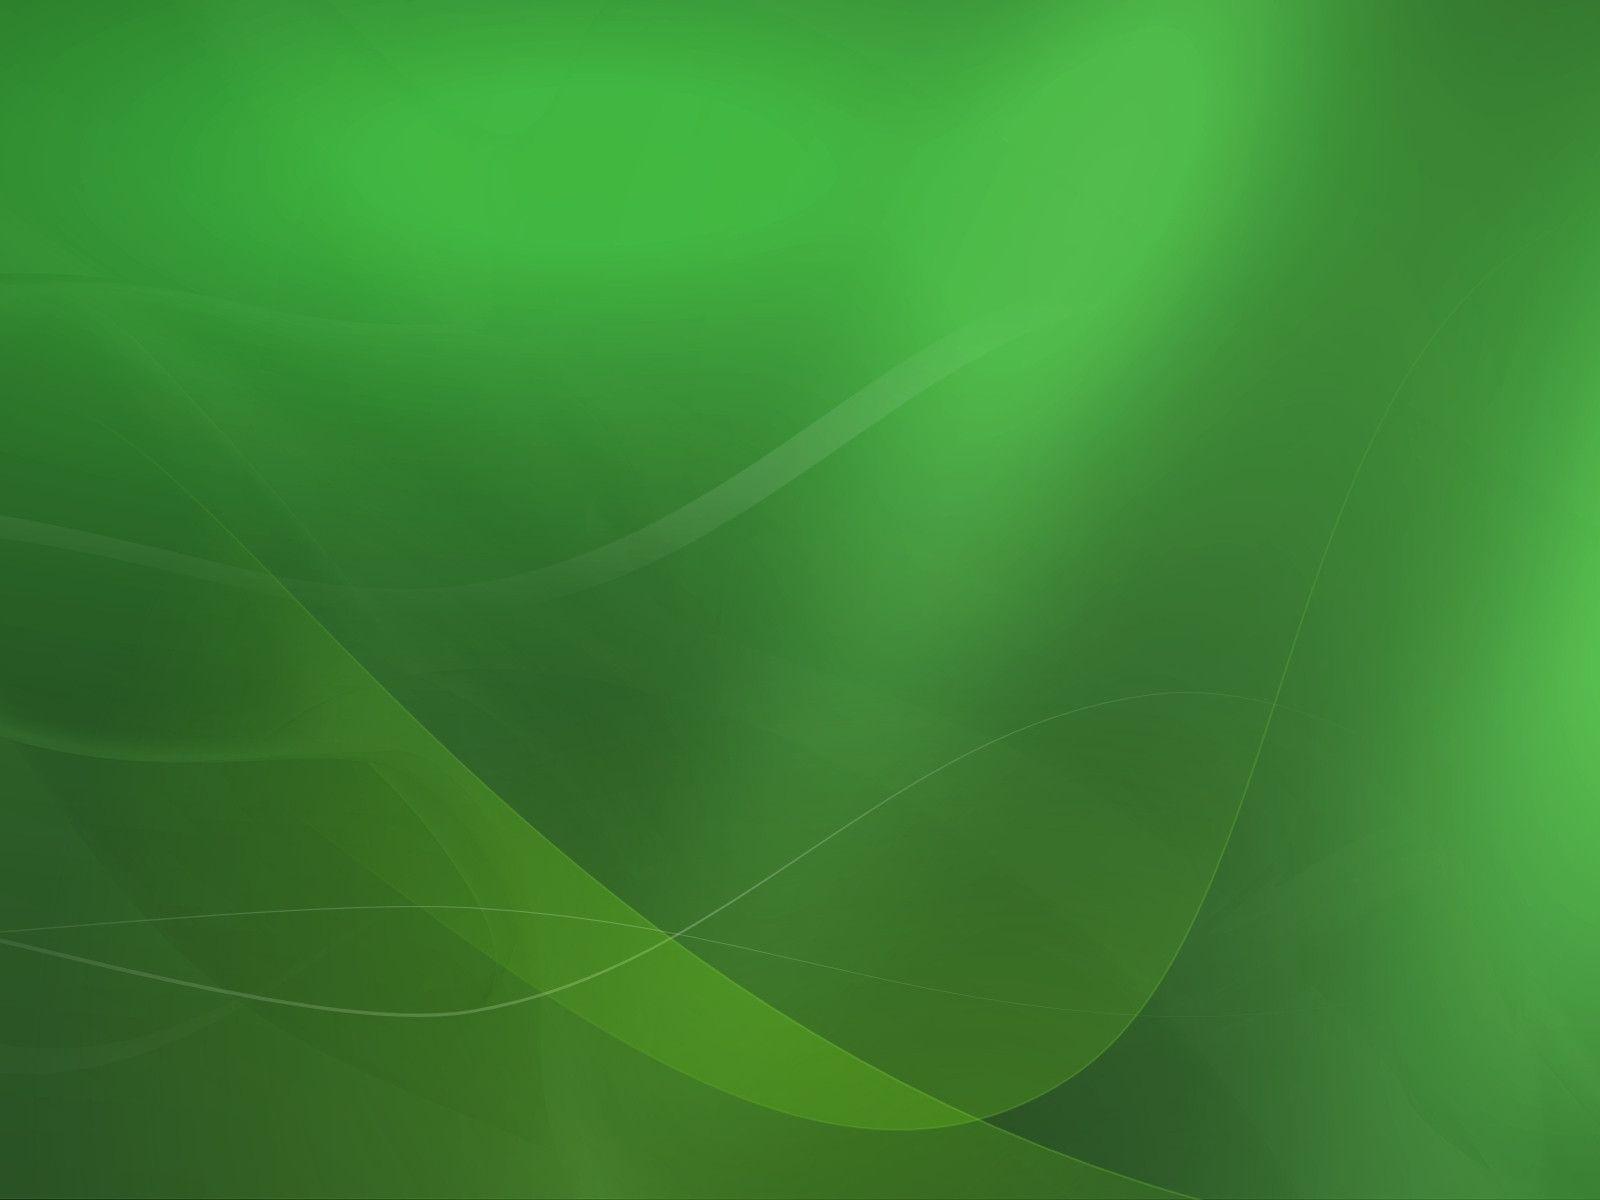 Suse Linux Wallpapers - Wallpaper Cave